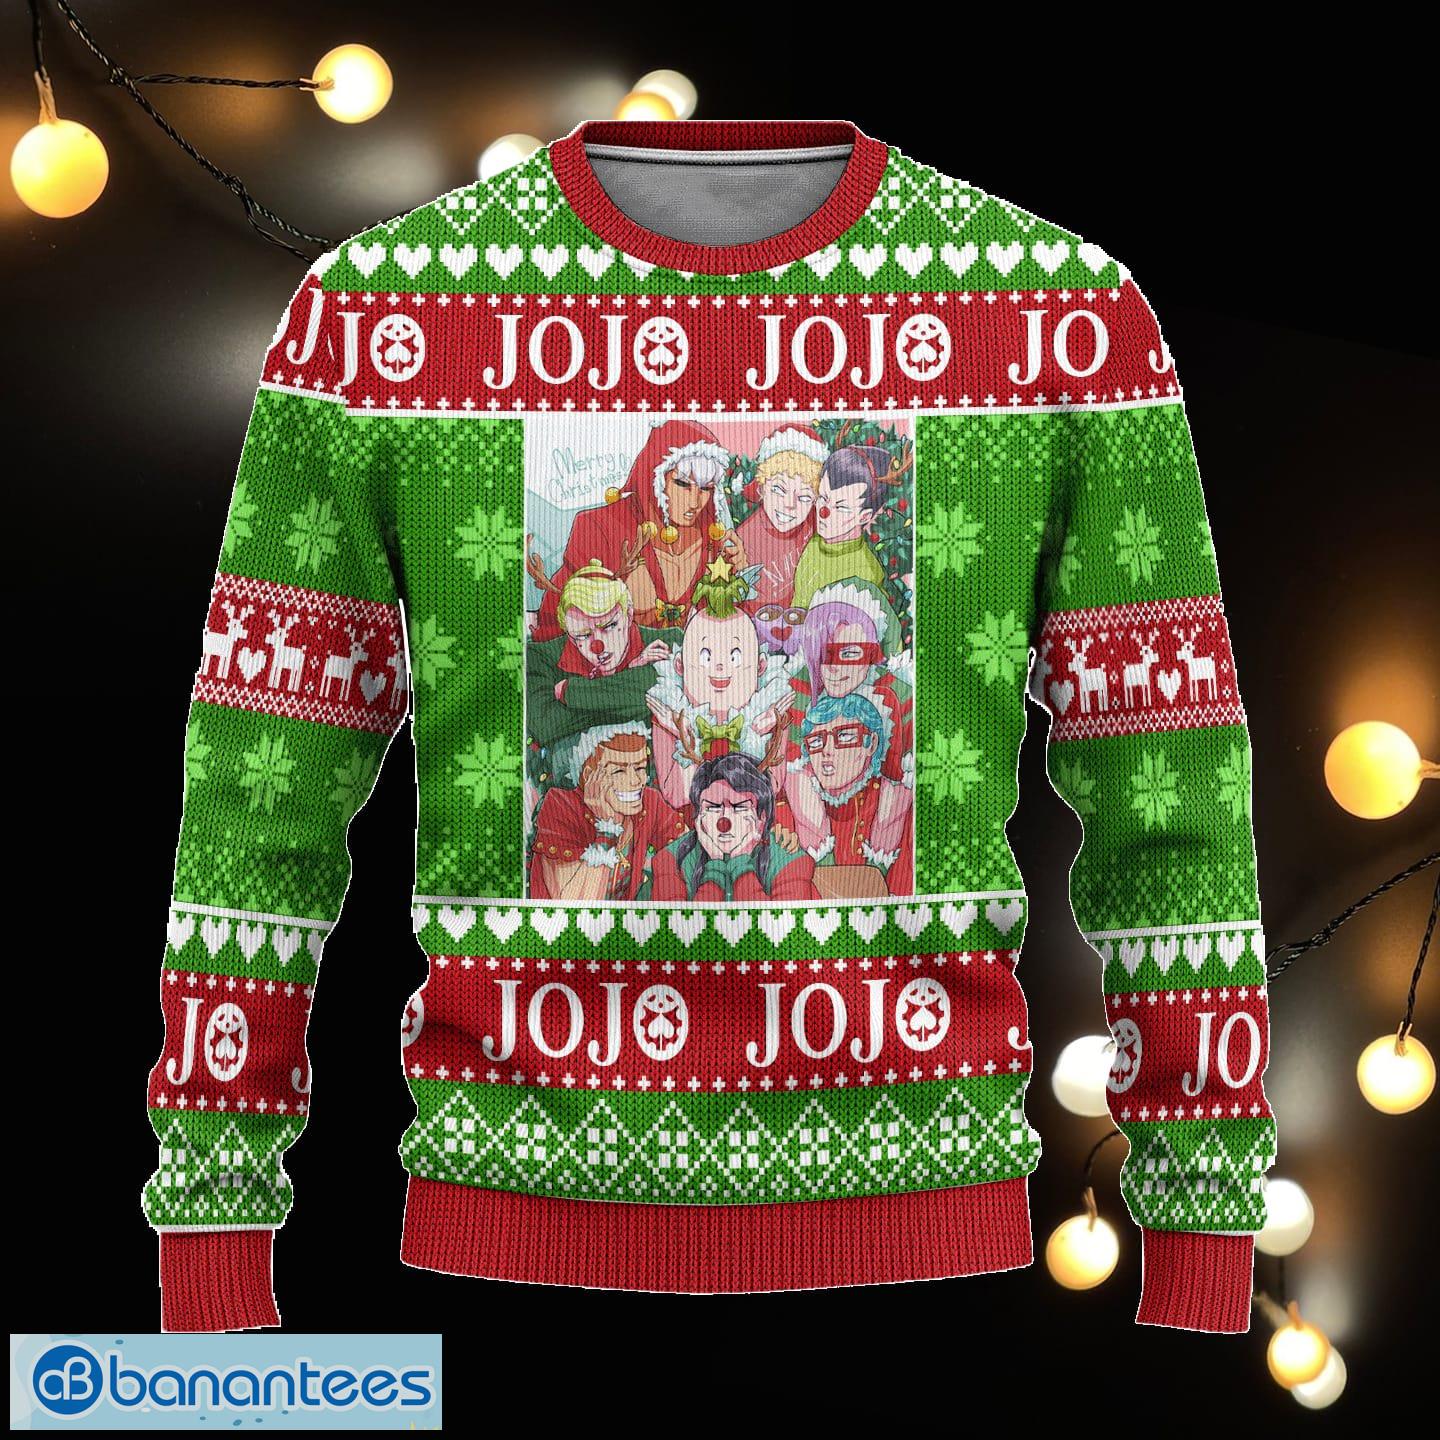 33 Truly Unforgettable Ugly Christmas Sweaters That'll Win